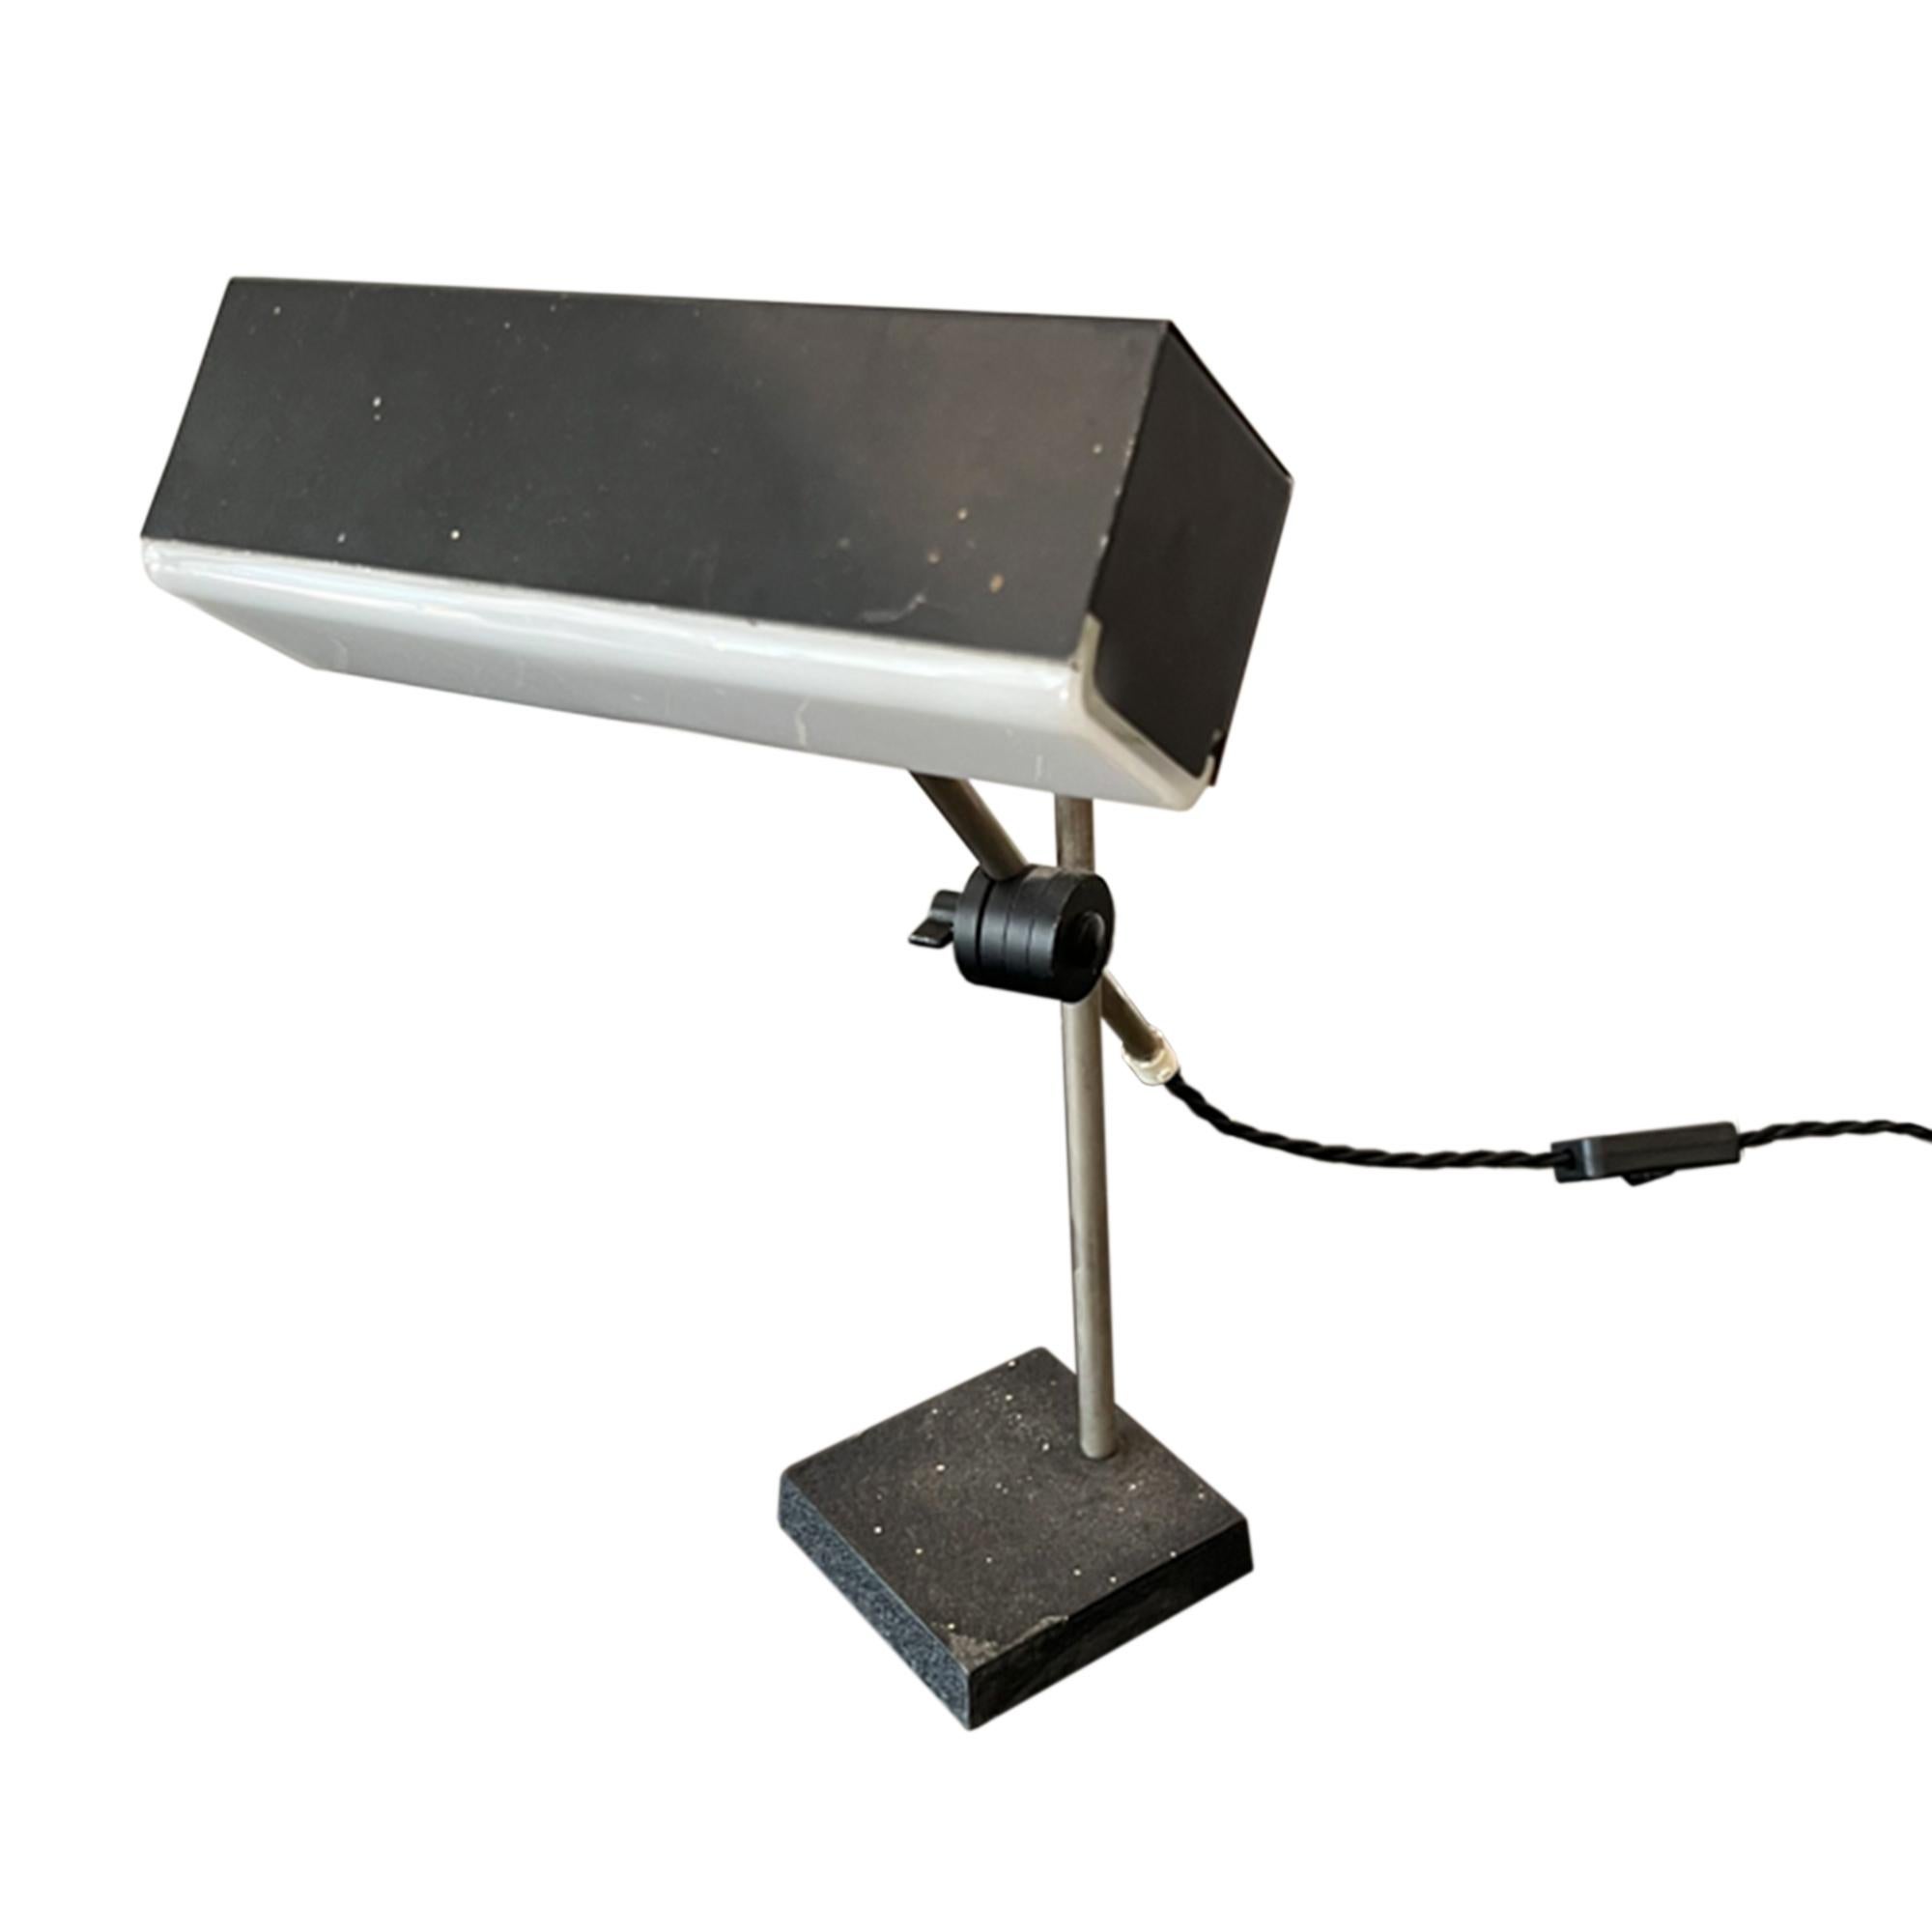 This adjustable desk lamp has a black painted textured steel base and a perspex shade.

A great addition to your study. We've had the light rewired with twisted black rope flex. 

Made in France in the 1960s.